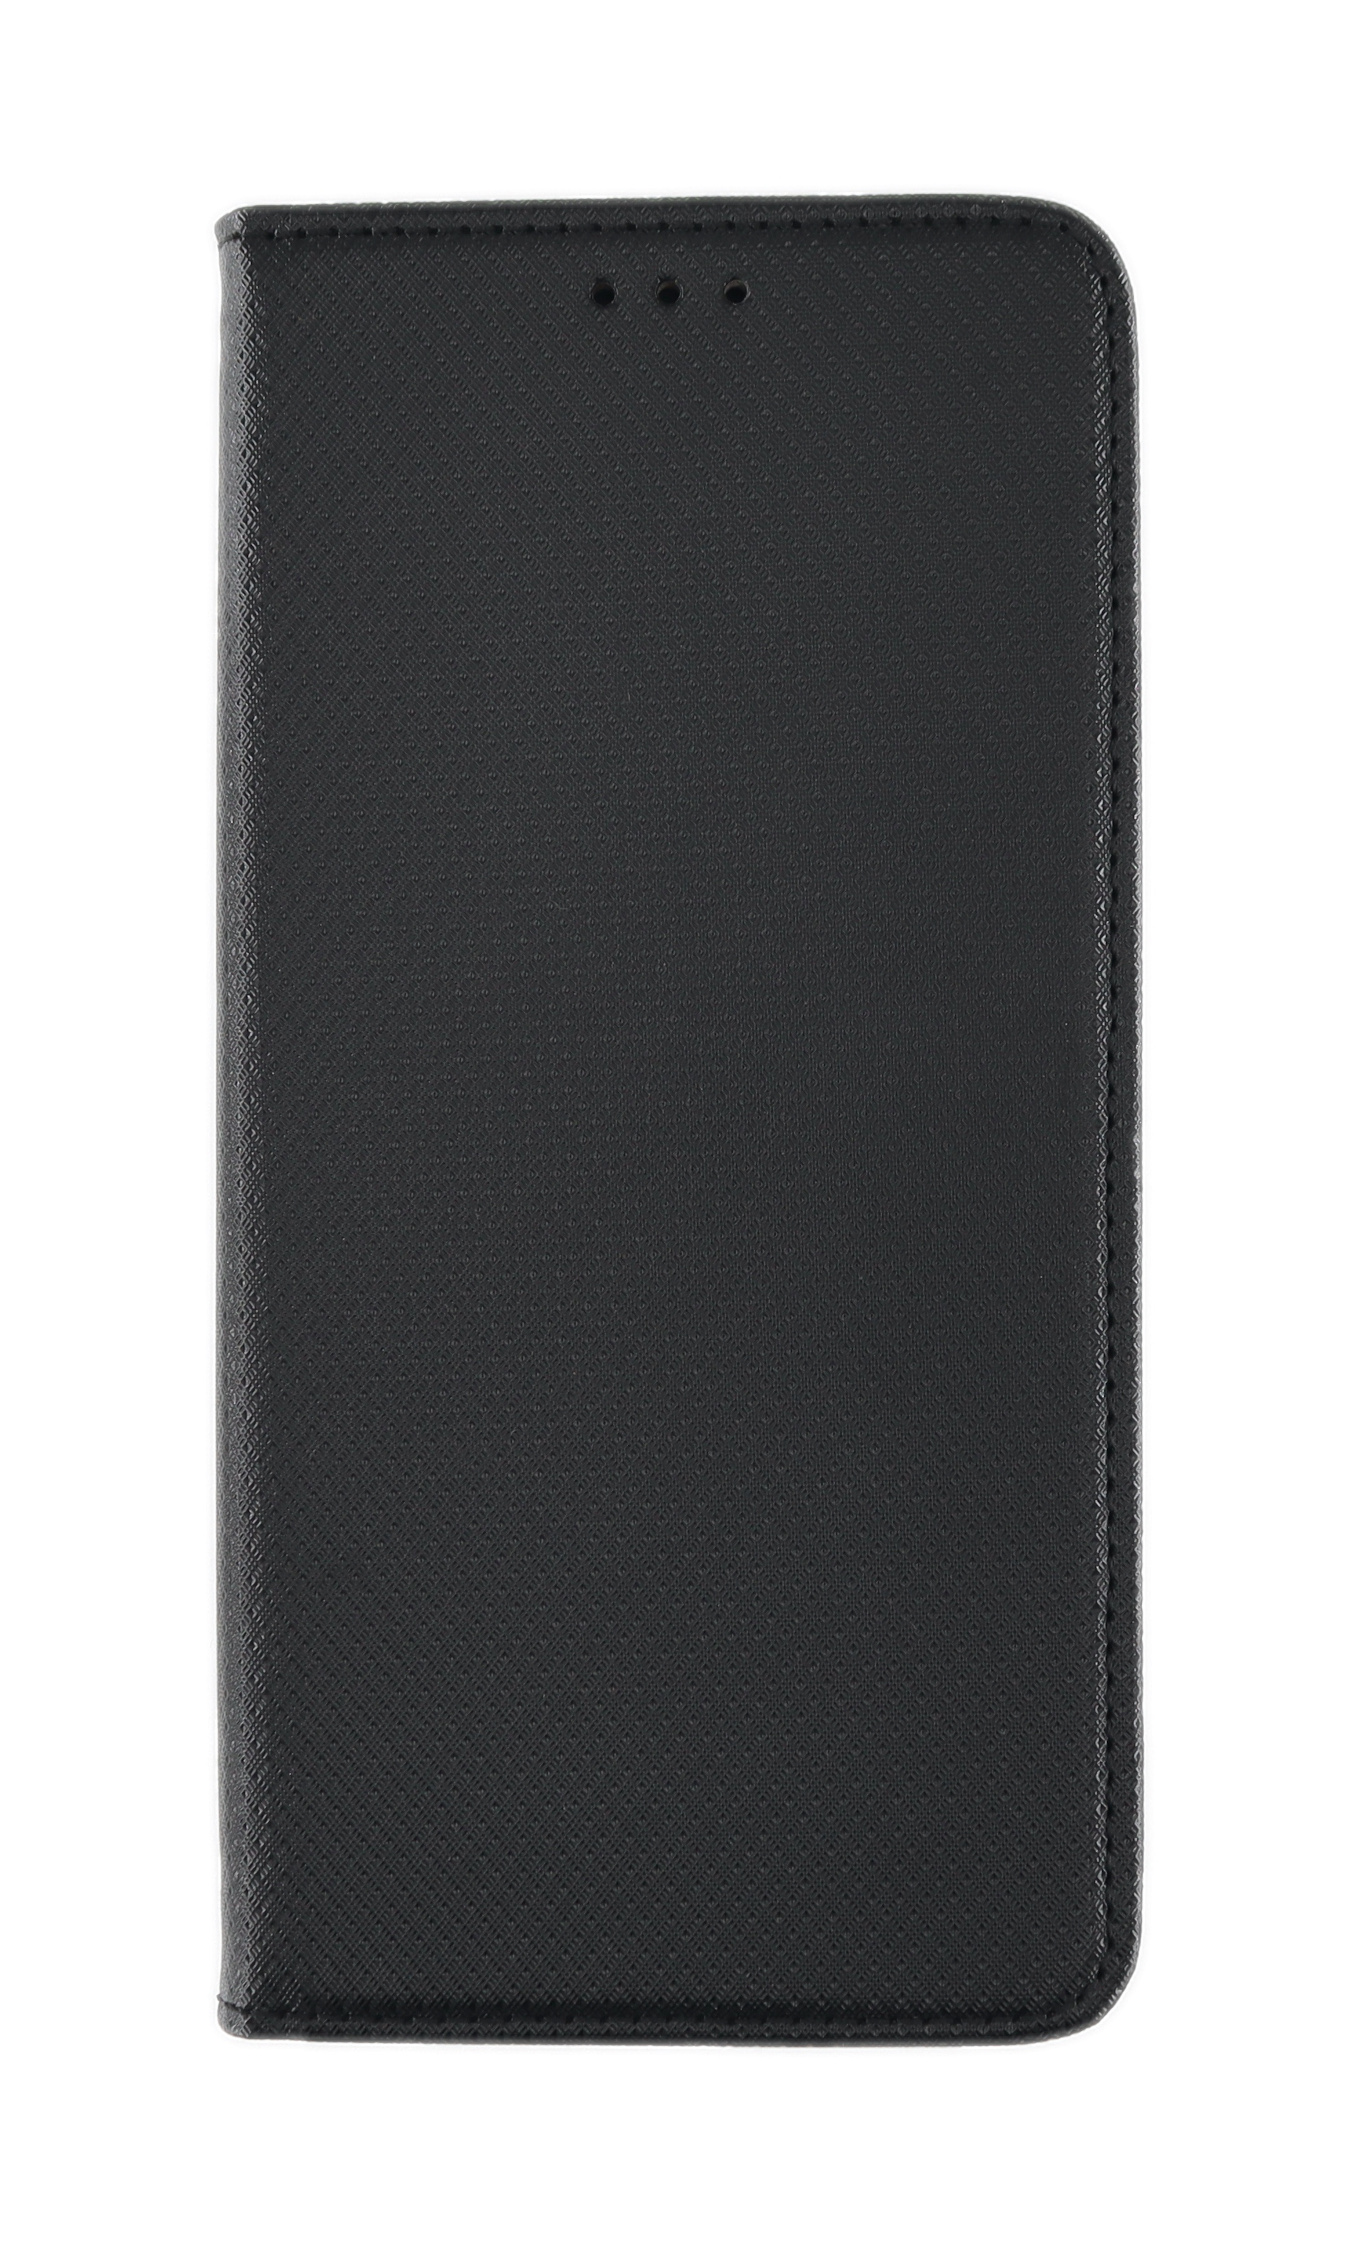 JAMCOVER Bookcase Texture, A05s, Galaxy Samsung, Schwarz Bookcover